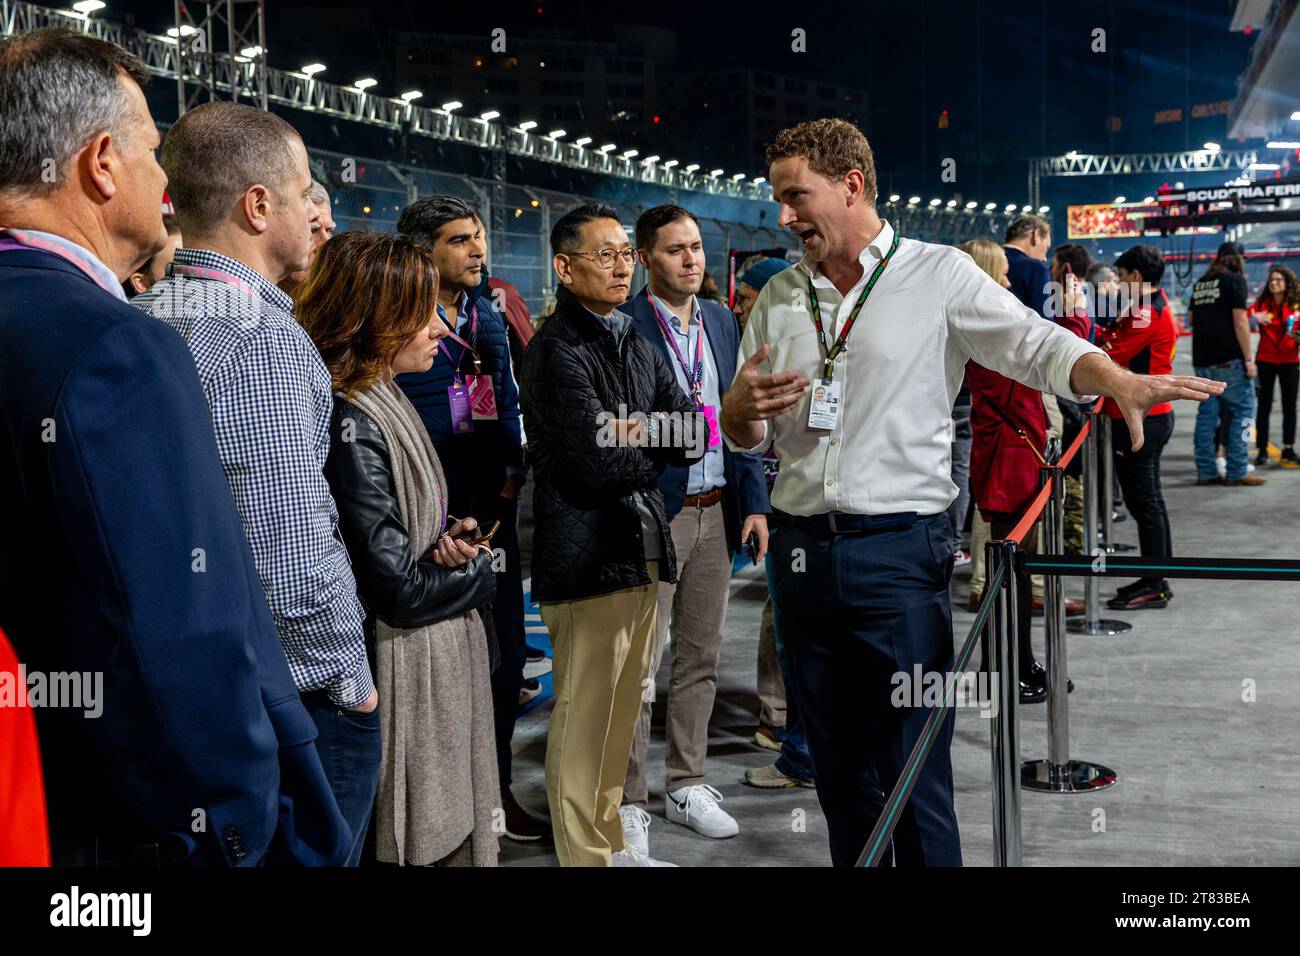 Las Vegas, USA. 17th Nov, 2023. Sam Power discusses the cars with a group of fans at the Formula 1 Grand Prix auto race in Las Vegas, NV on November 17, 2023 (Photo by Travis Ball/Sipa USA) Credit: Sipa USA/Alamy Live News Stock Photo